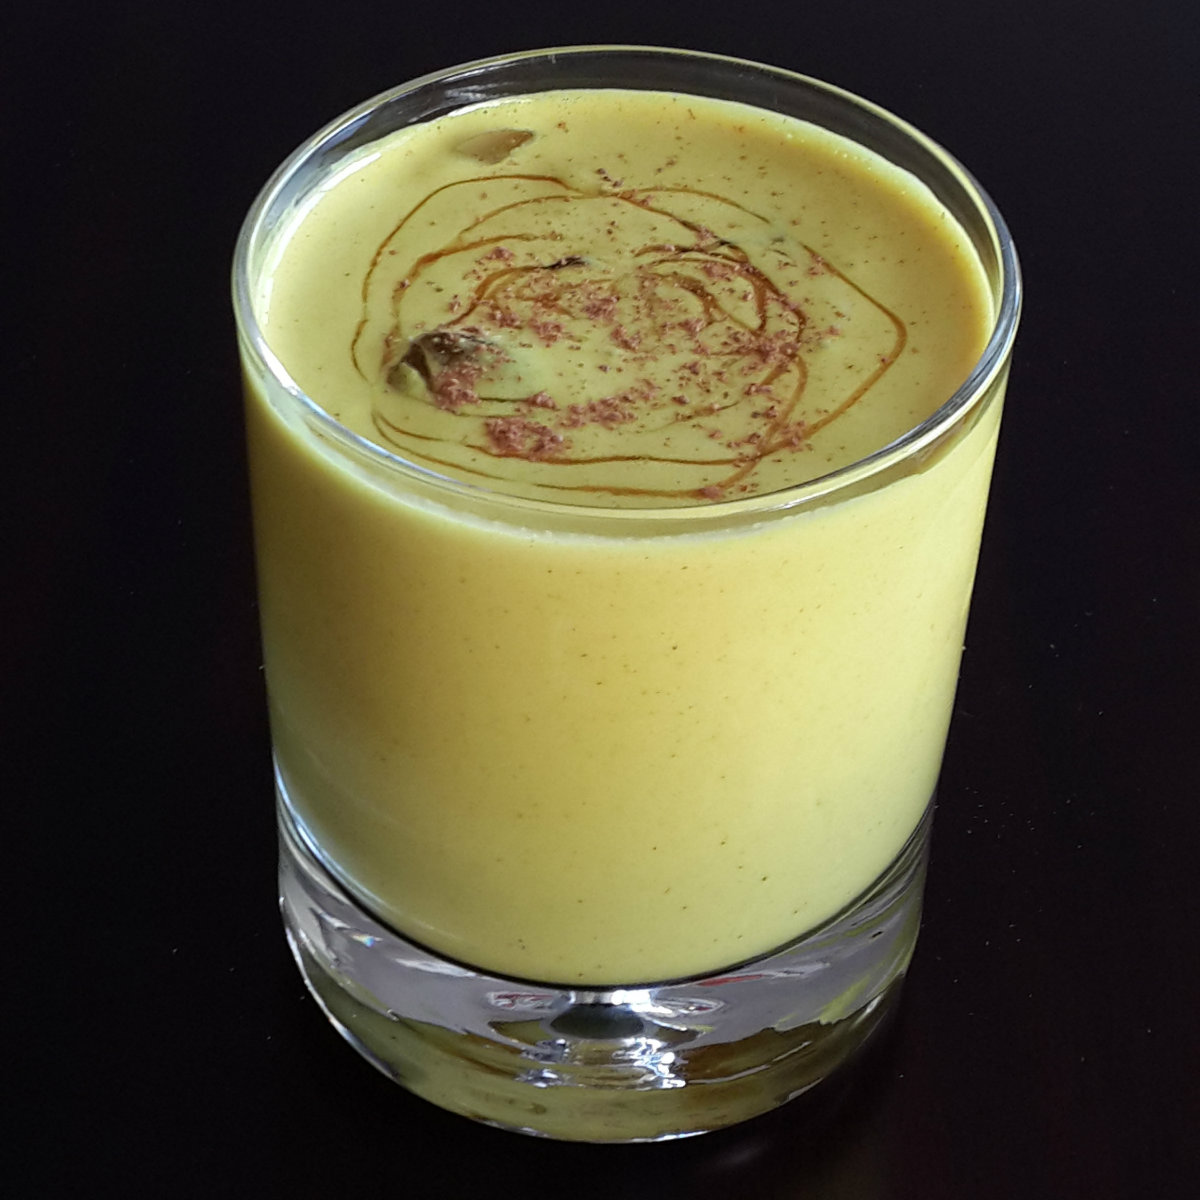 Chilled Turmeric Latte